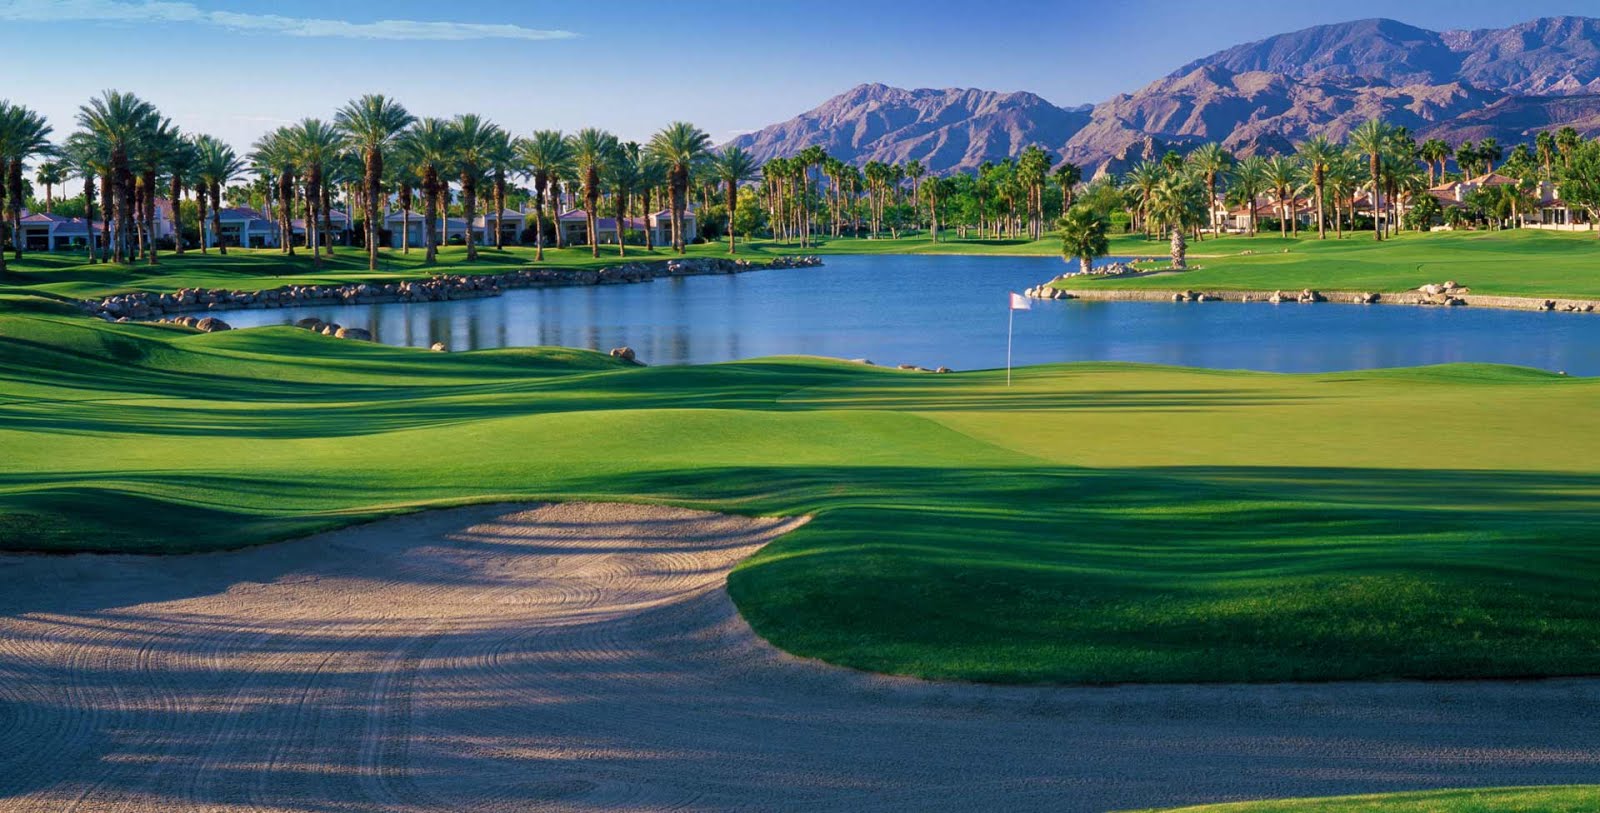 The Club at PGA West